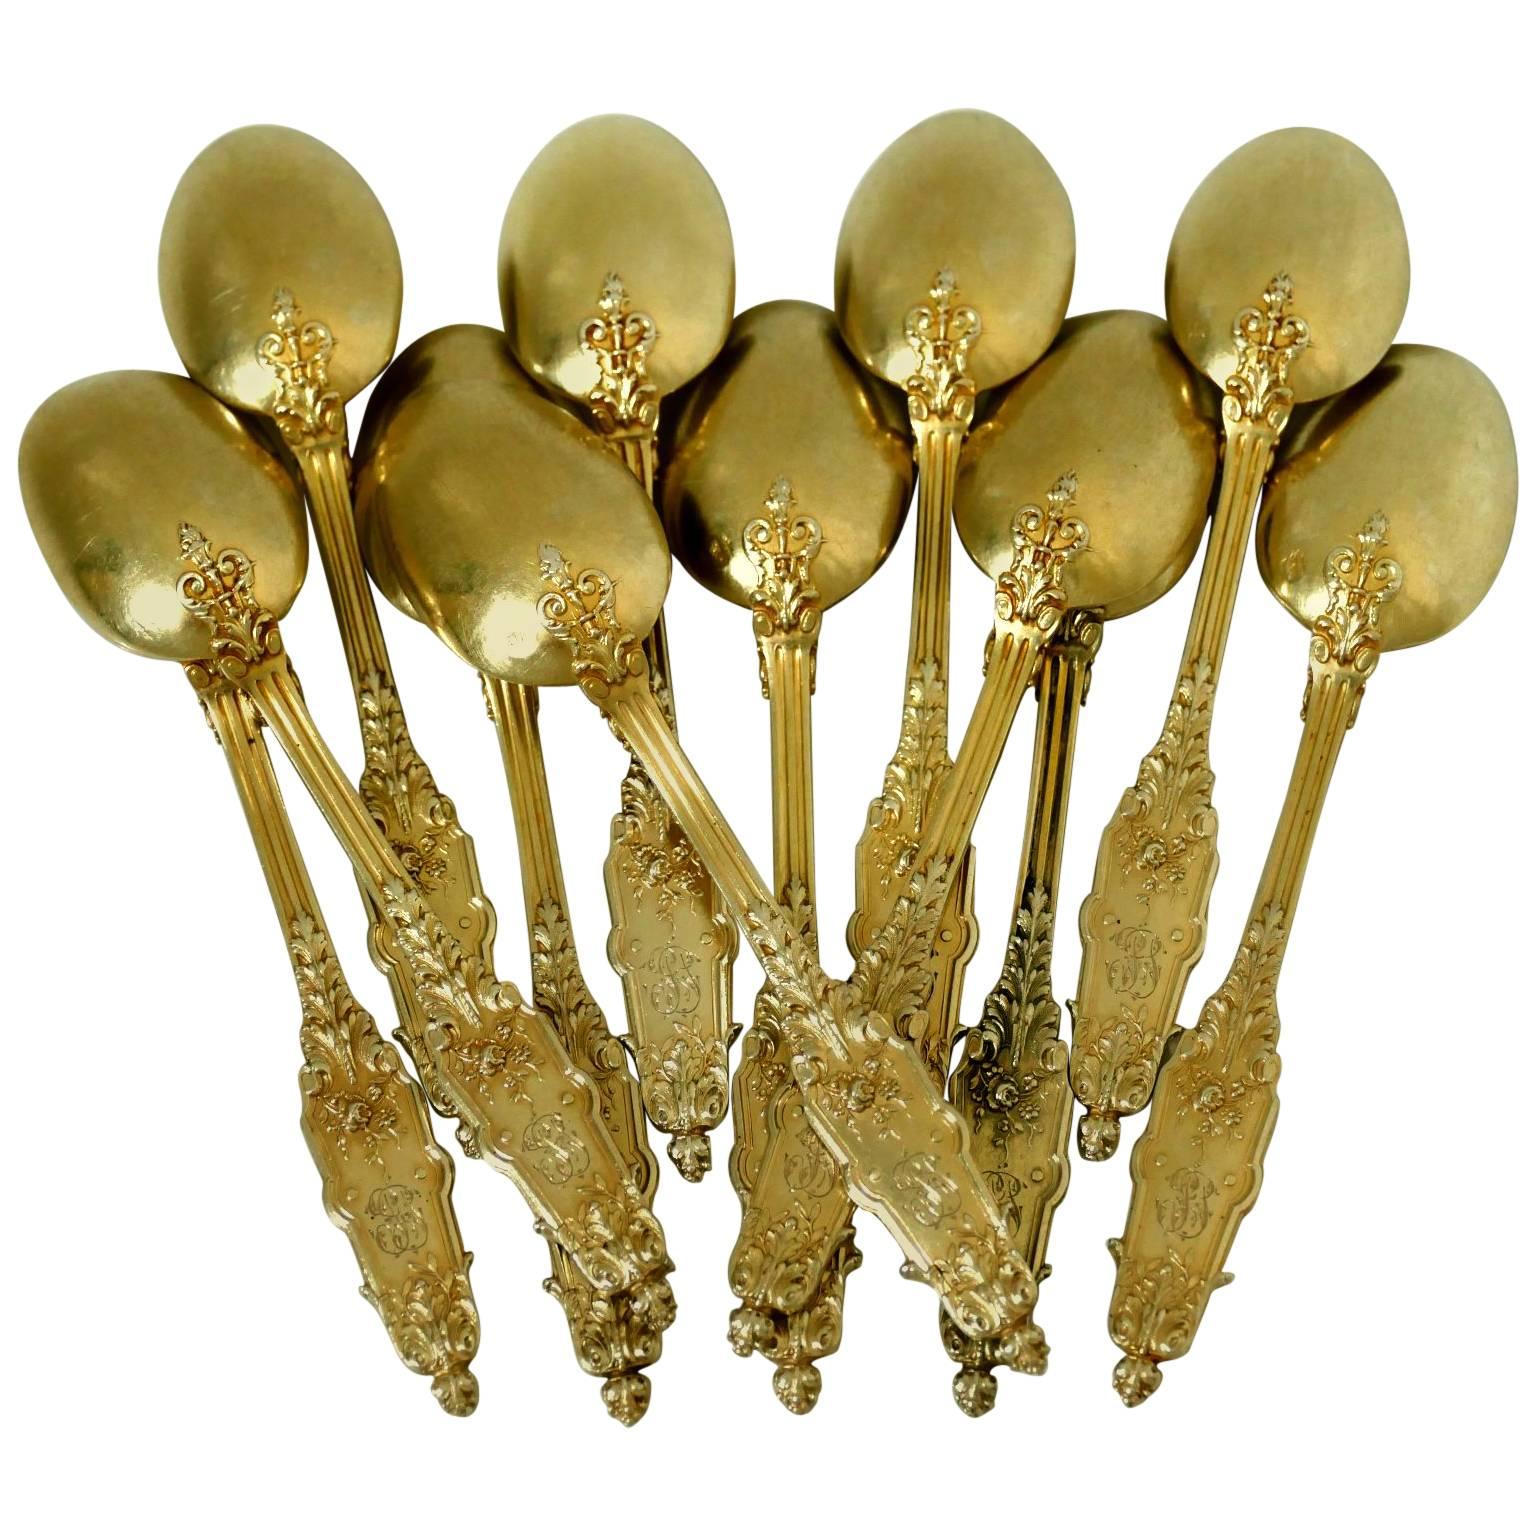 Puiforcat French Sterling Silver 18k Gold Tea Spoons Set 12 pc Box Acanthus